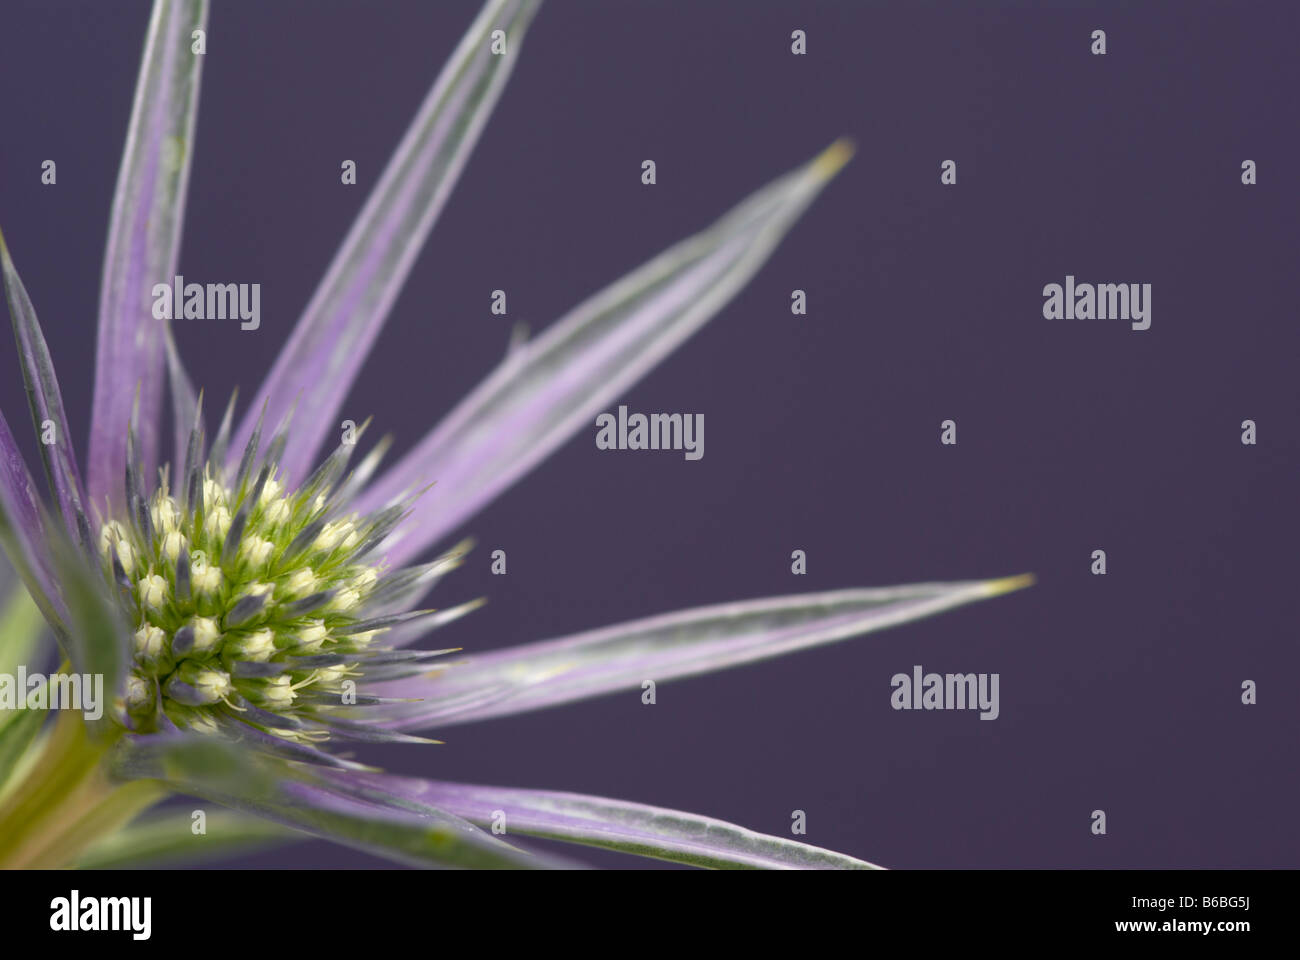 Sea Holly (Eryngium bourgatii Picos Amethyst), close up of flower against purple background. Stock Photo